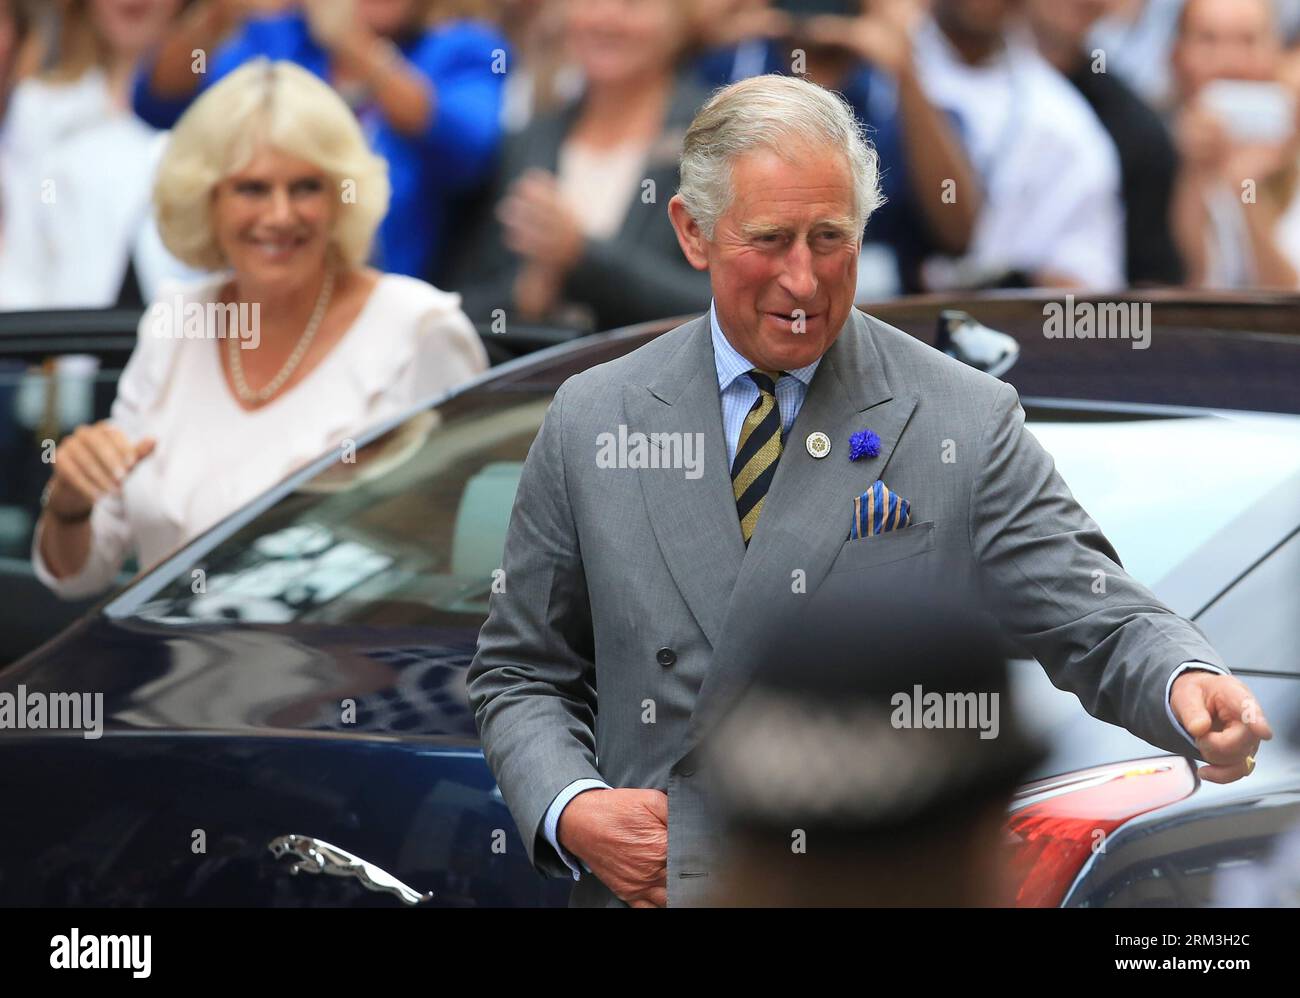 Bildnummer: 60179111  Datum: 23.07.2013  Copyright: imago/Xinhua (130723) -- LONDON, July 23, 2013 (Xinhua) -- Prince Charles of Wales and his wife Camilla, Duchess of Cornwall, arrive at the Lindo Wing of St Mary s Hospital, in central London, July 23, 2013. Britain s Duchess of Cambridge Kate gave birth to a boy Monday afternoon. (Xinhua/Yin Gang) UK-LONDON-ROYAL BABY PUBLICATIONxNOTxINxCHN People Entertainment Geburt Geburtstag Nachkommen Adel Catherine Middleton Prinz William x1x xsk 2013 quer premiumd o0 Familie, privat Frau Mann großeltern     60179111 Date 23 07 2013 Copyright Imago XIN Stock Photo